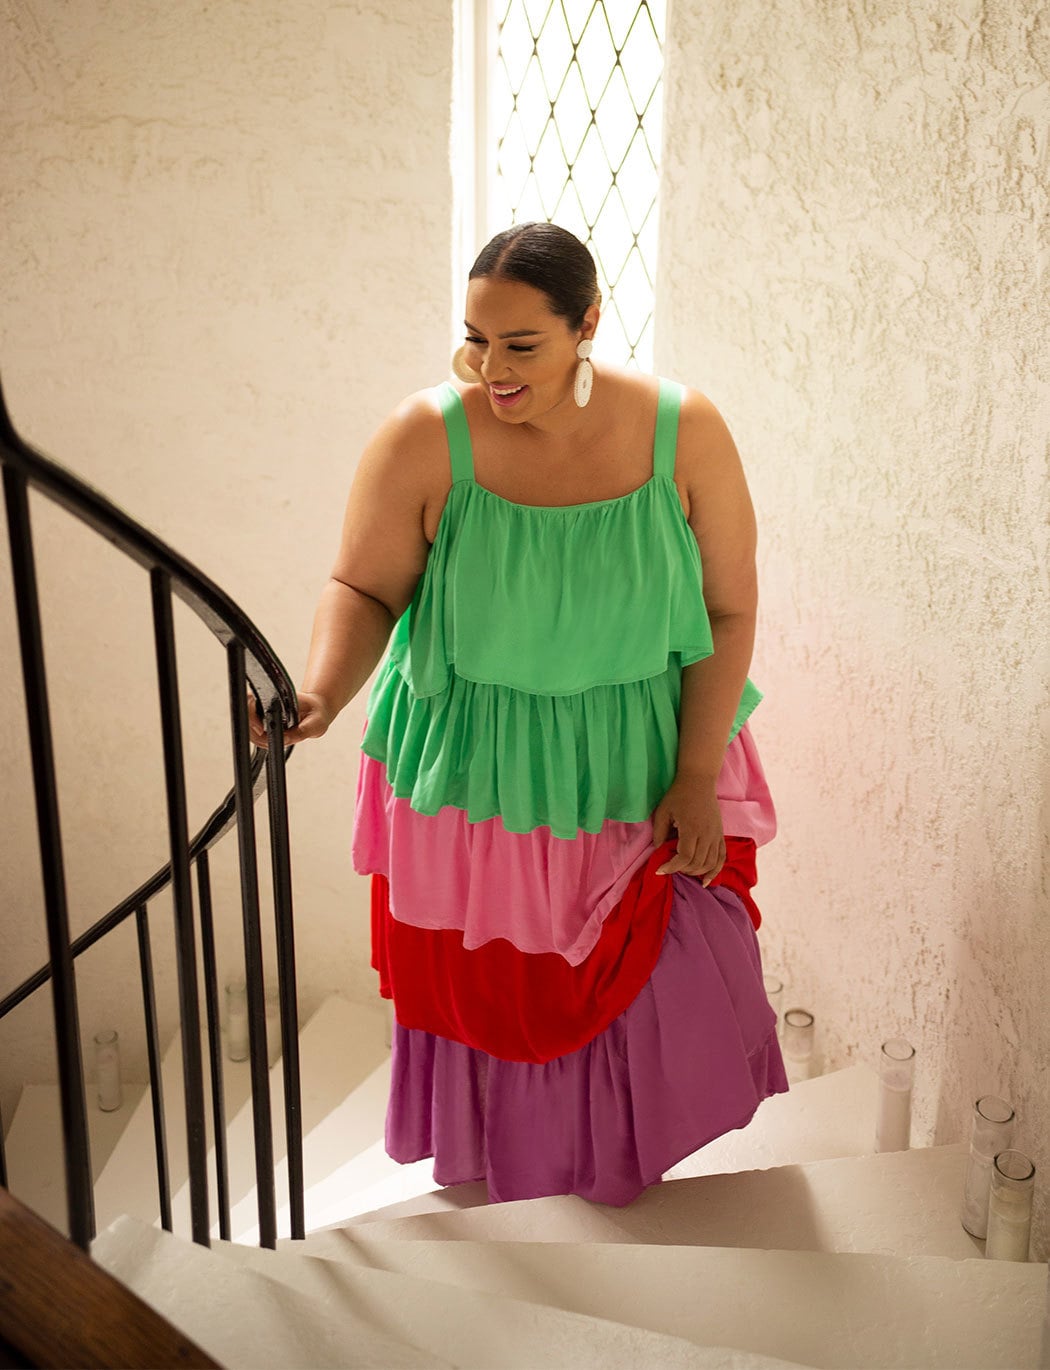 Found At Kohl's: Suprisingly Good Plus-Size Fashion - The Mom Edit